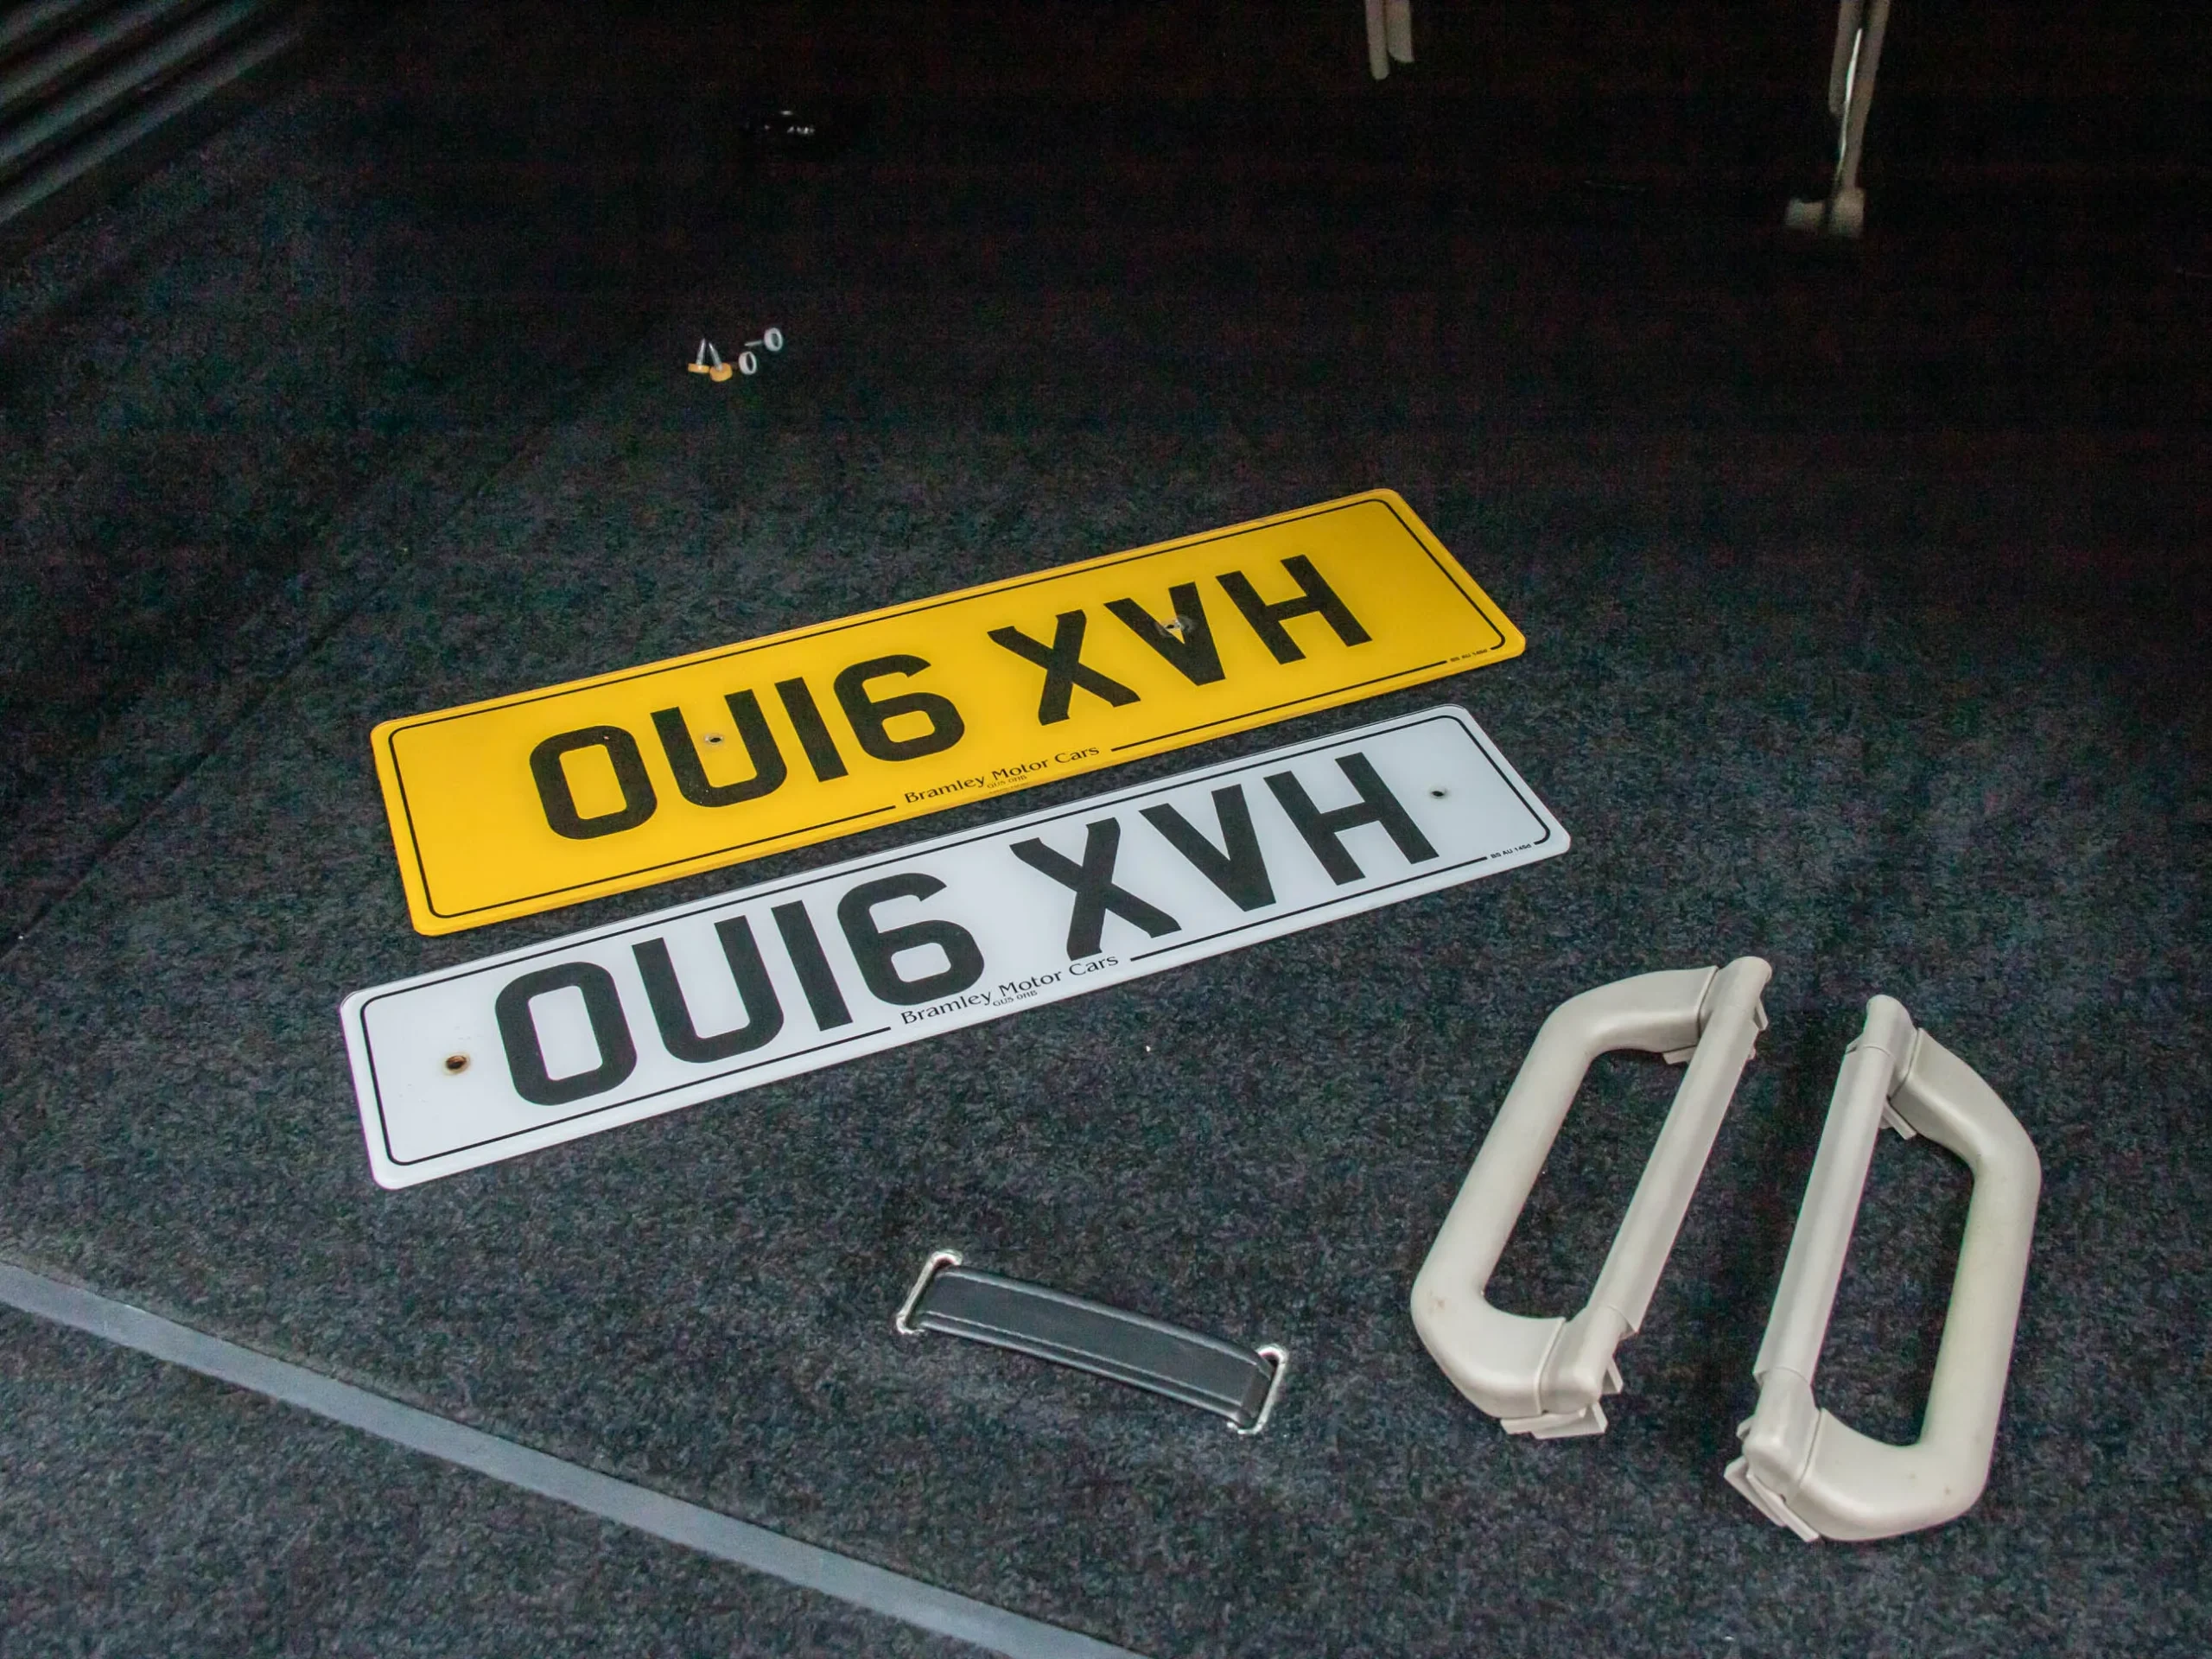 Queen Elizabeth II’s car retained the queen’s grab handles and number plates